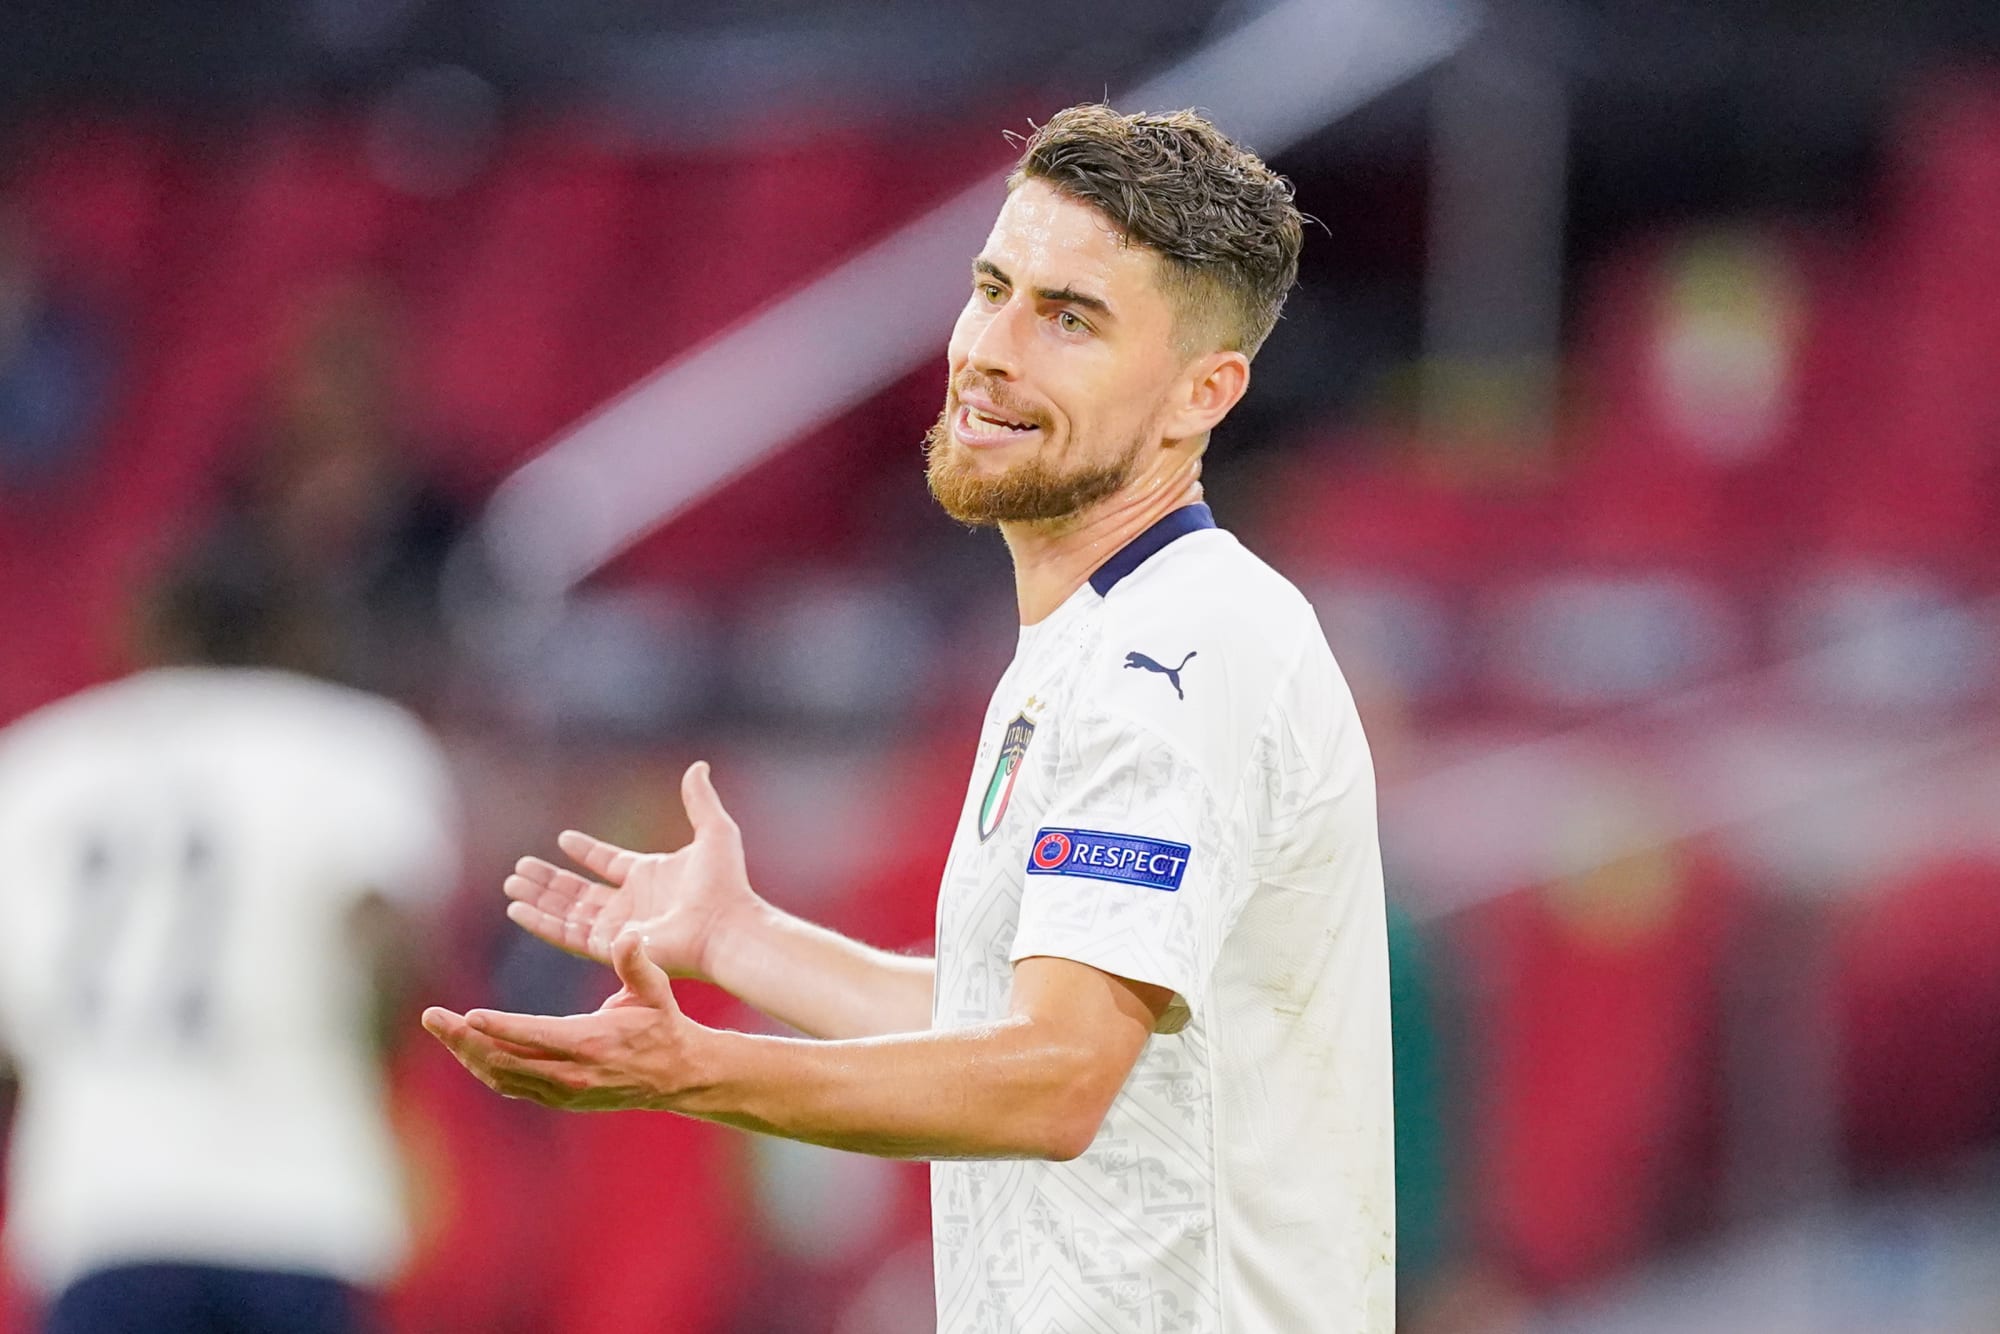 Signing Jorginho Takes Arsenal’s Chelsea Connection Too Far